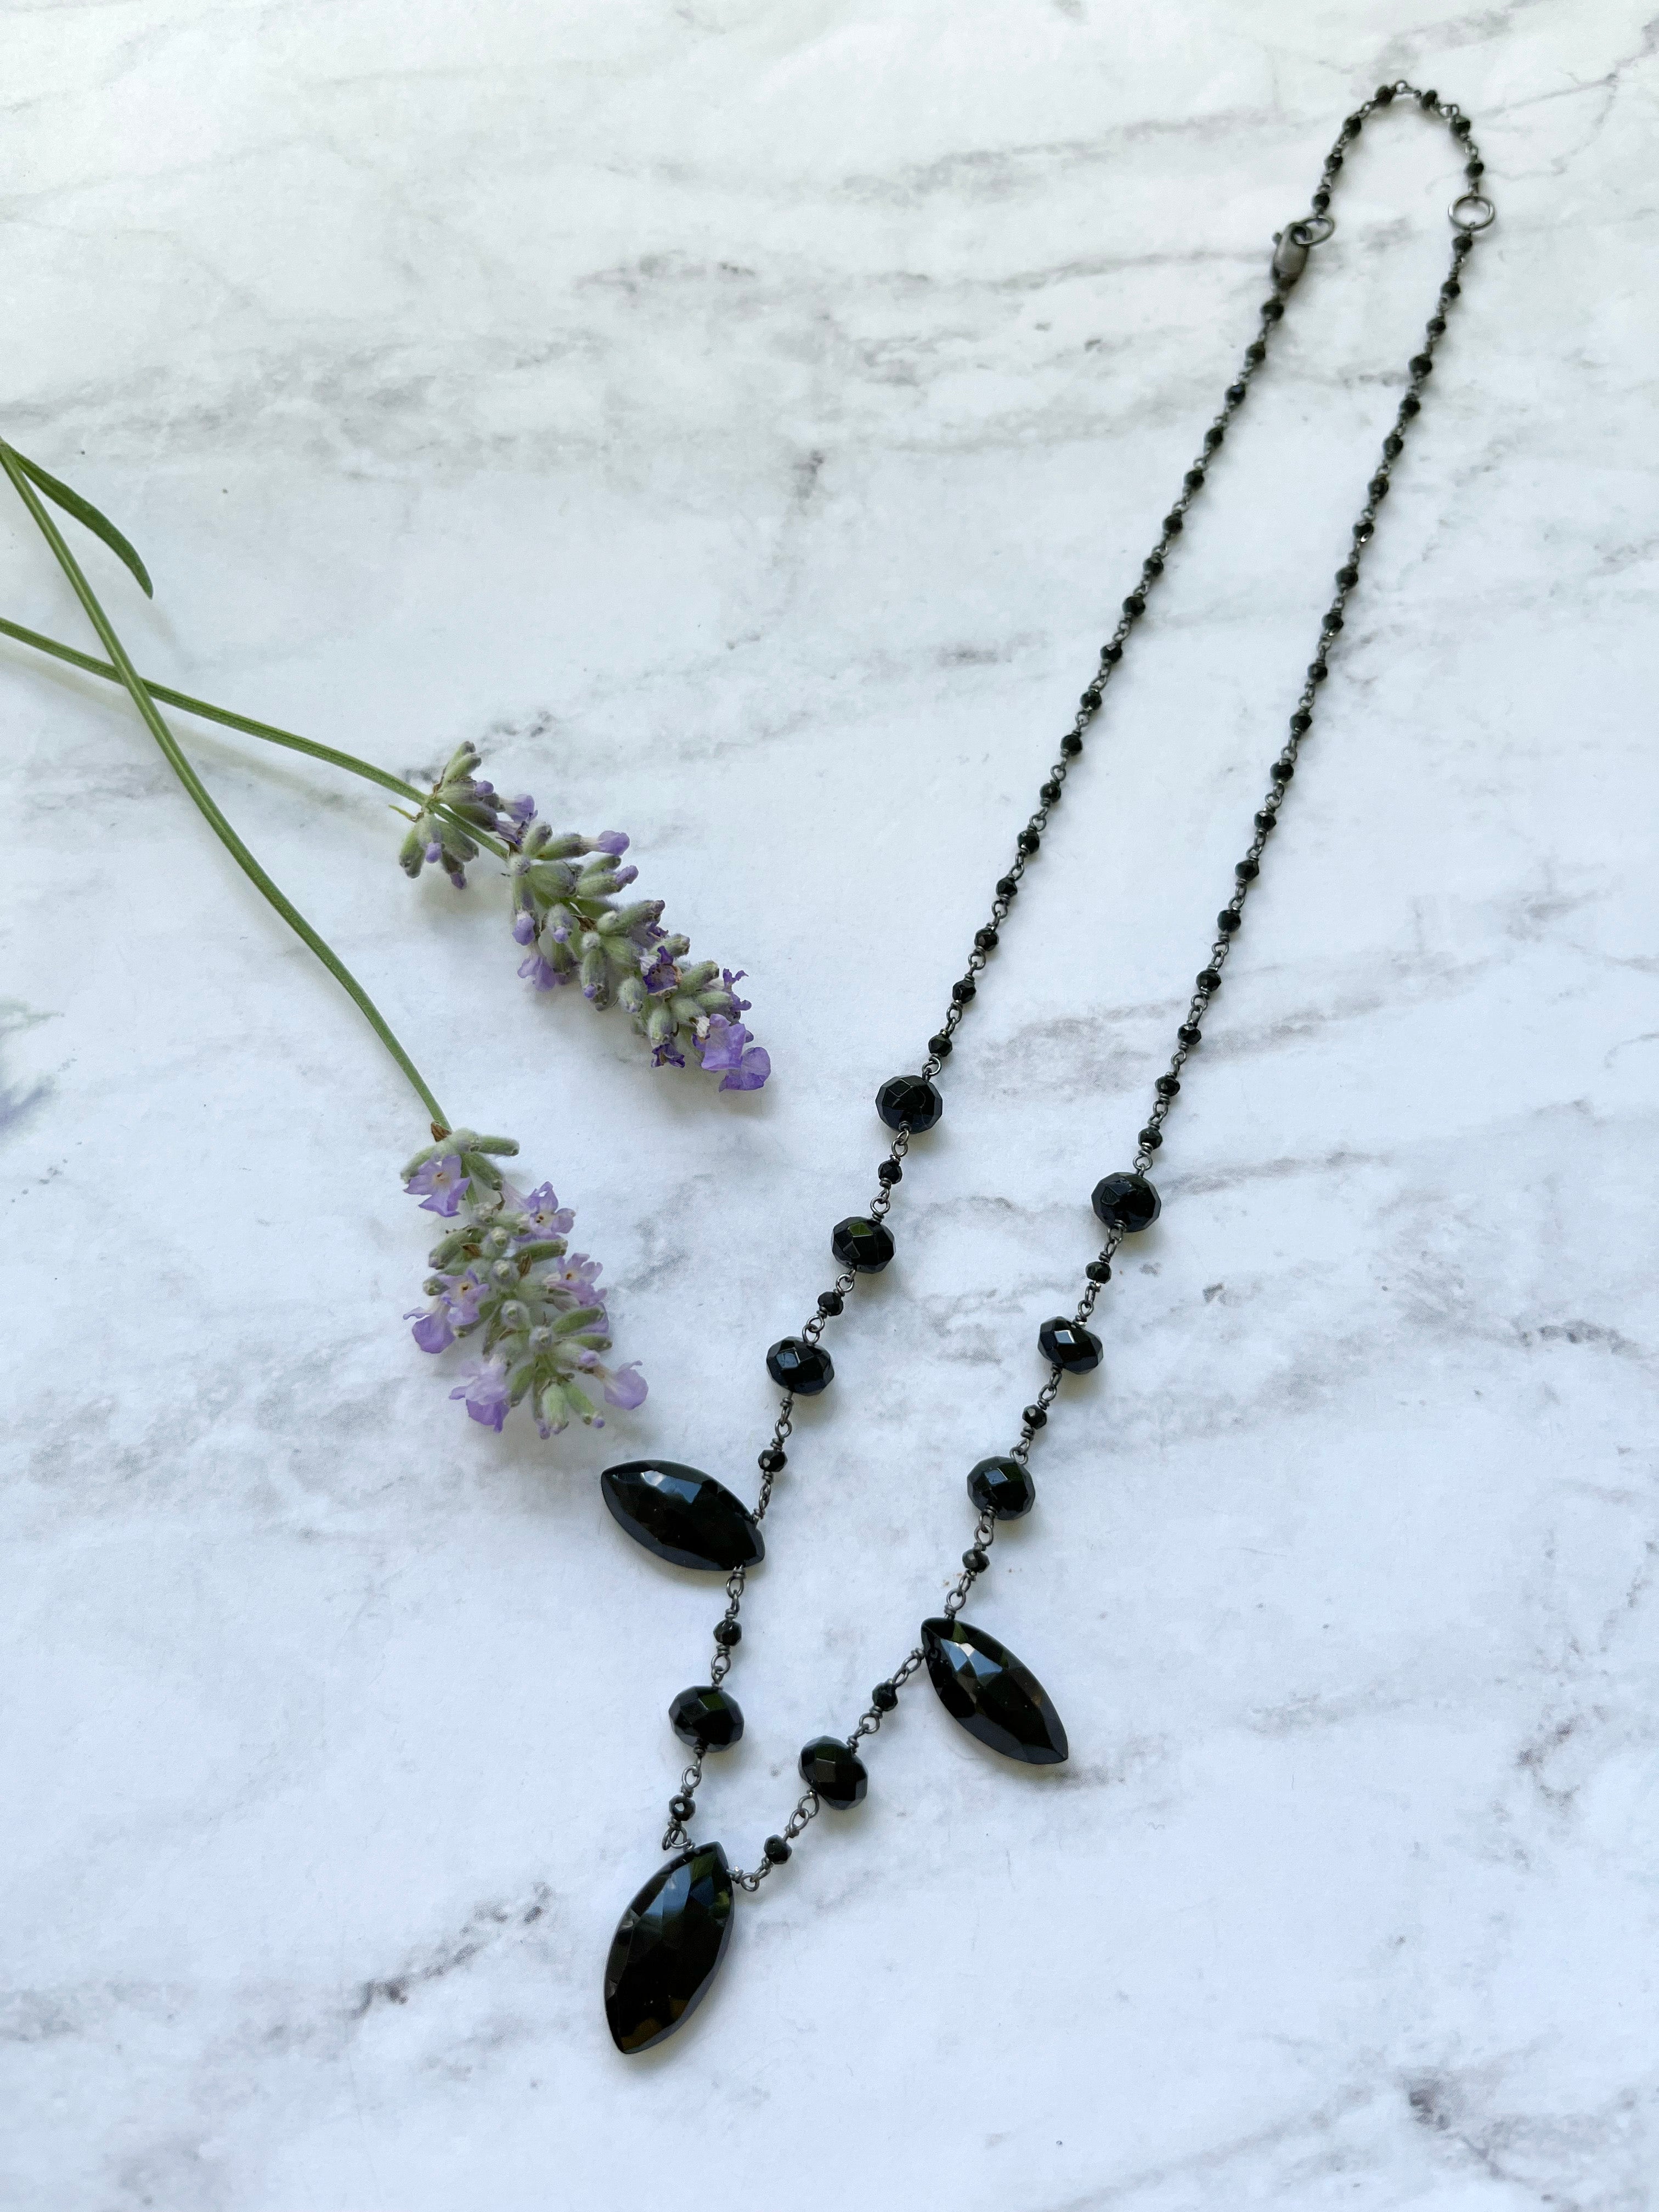 Black Spinel necklace and earrings